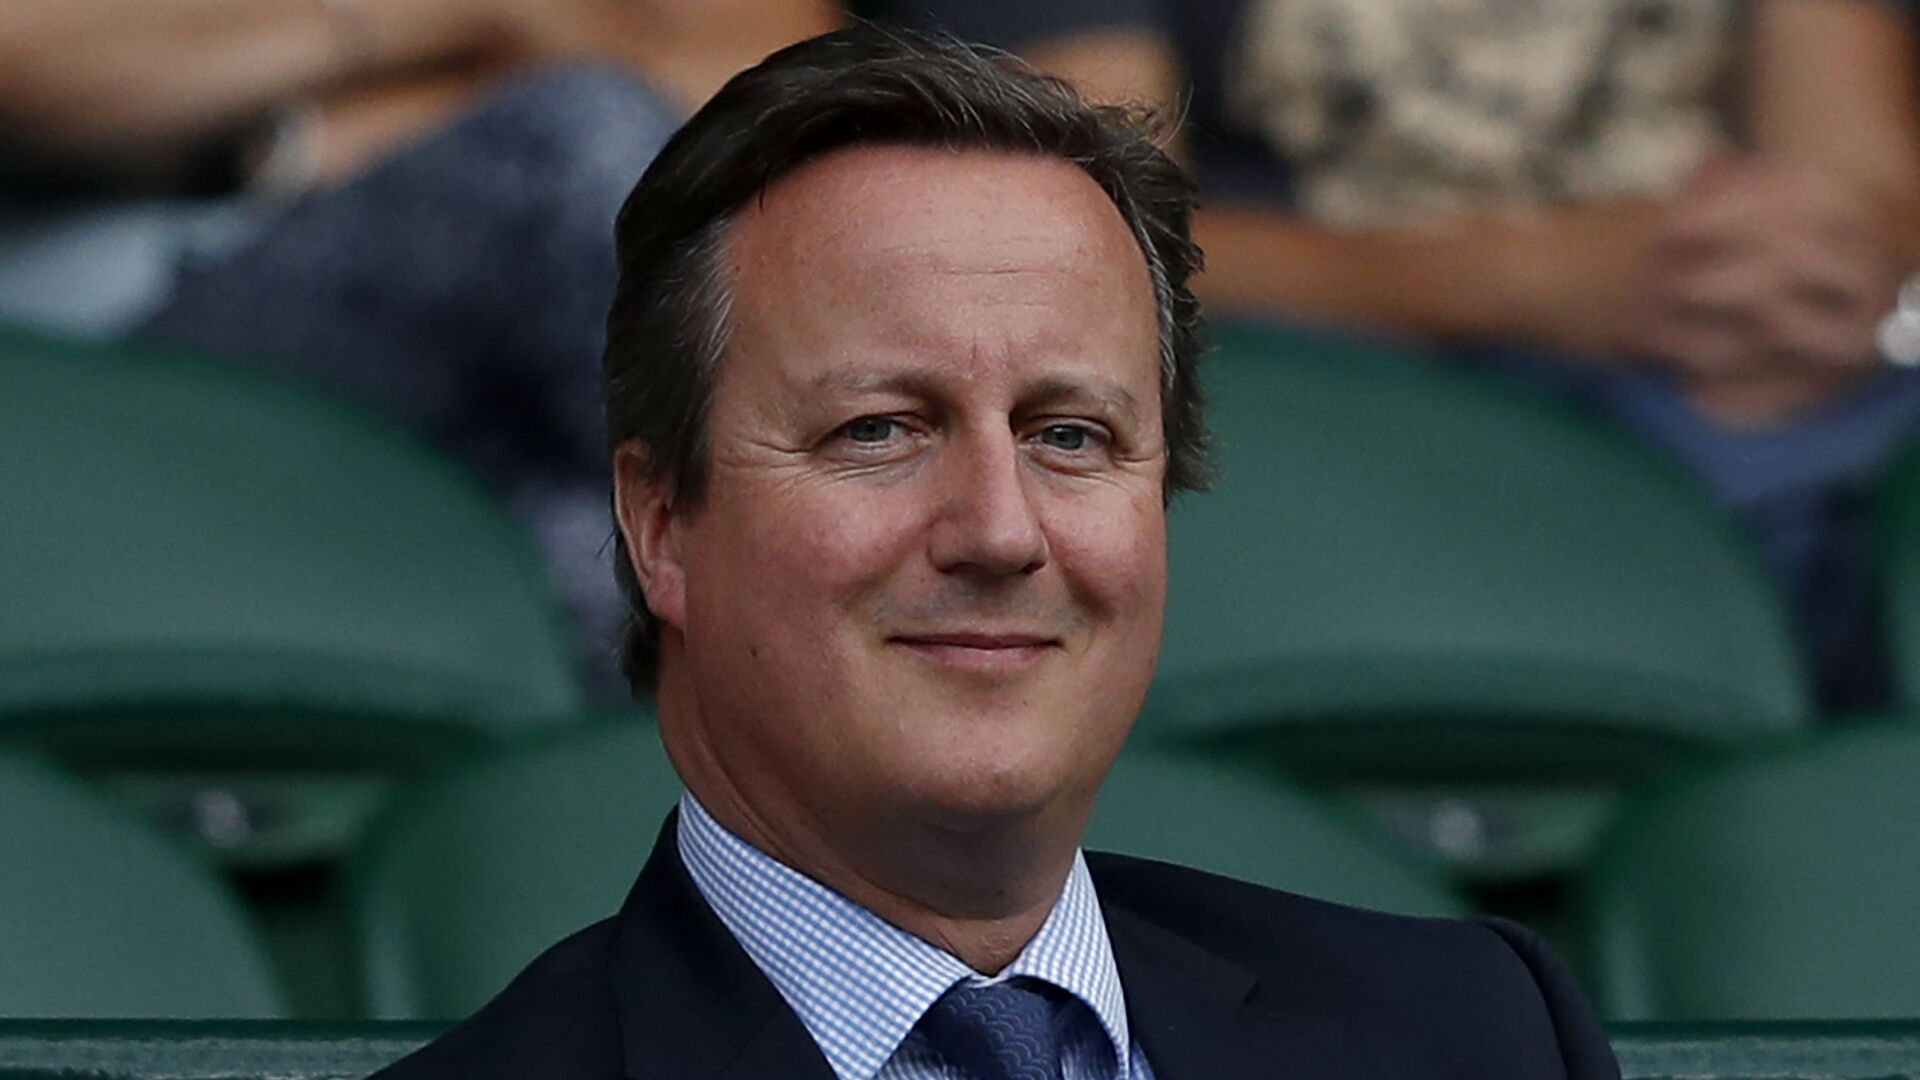 Britain's former Prime Minister David Cameron sits in the Royal Box on Centre Court following the women's singles semi-finals on the tenth day of the 2017 Wimbledon Championships at The All England Lawn Tennis Club in Wimbledon, southwest London, on July 13, 2017 - Sputnik International, 1920, 13.11.2023